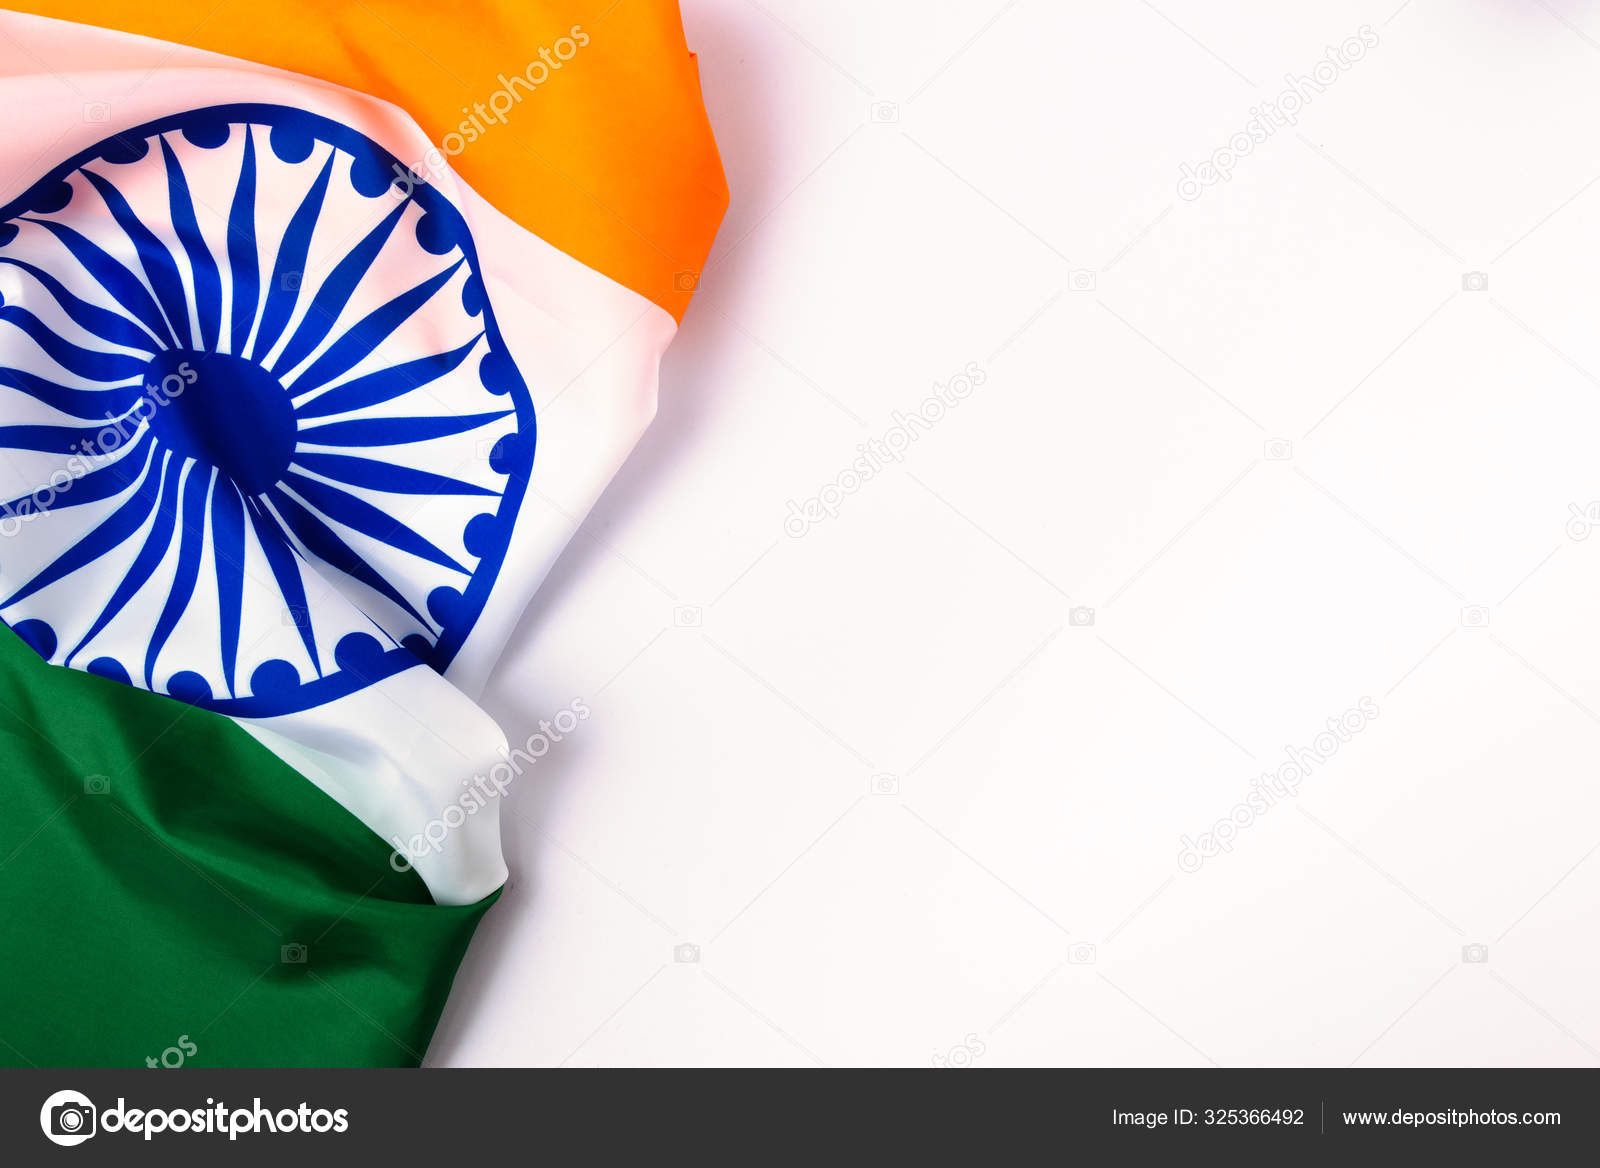 Constitution of india Stock Photos, Royalty Free Constitution of india  Images | Depositphotos